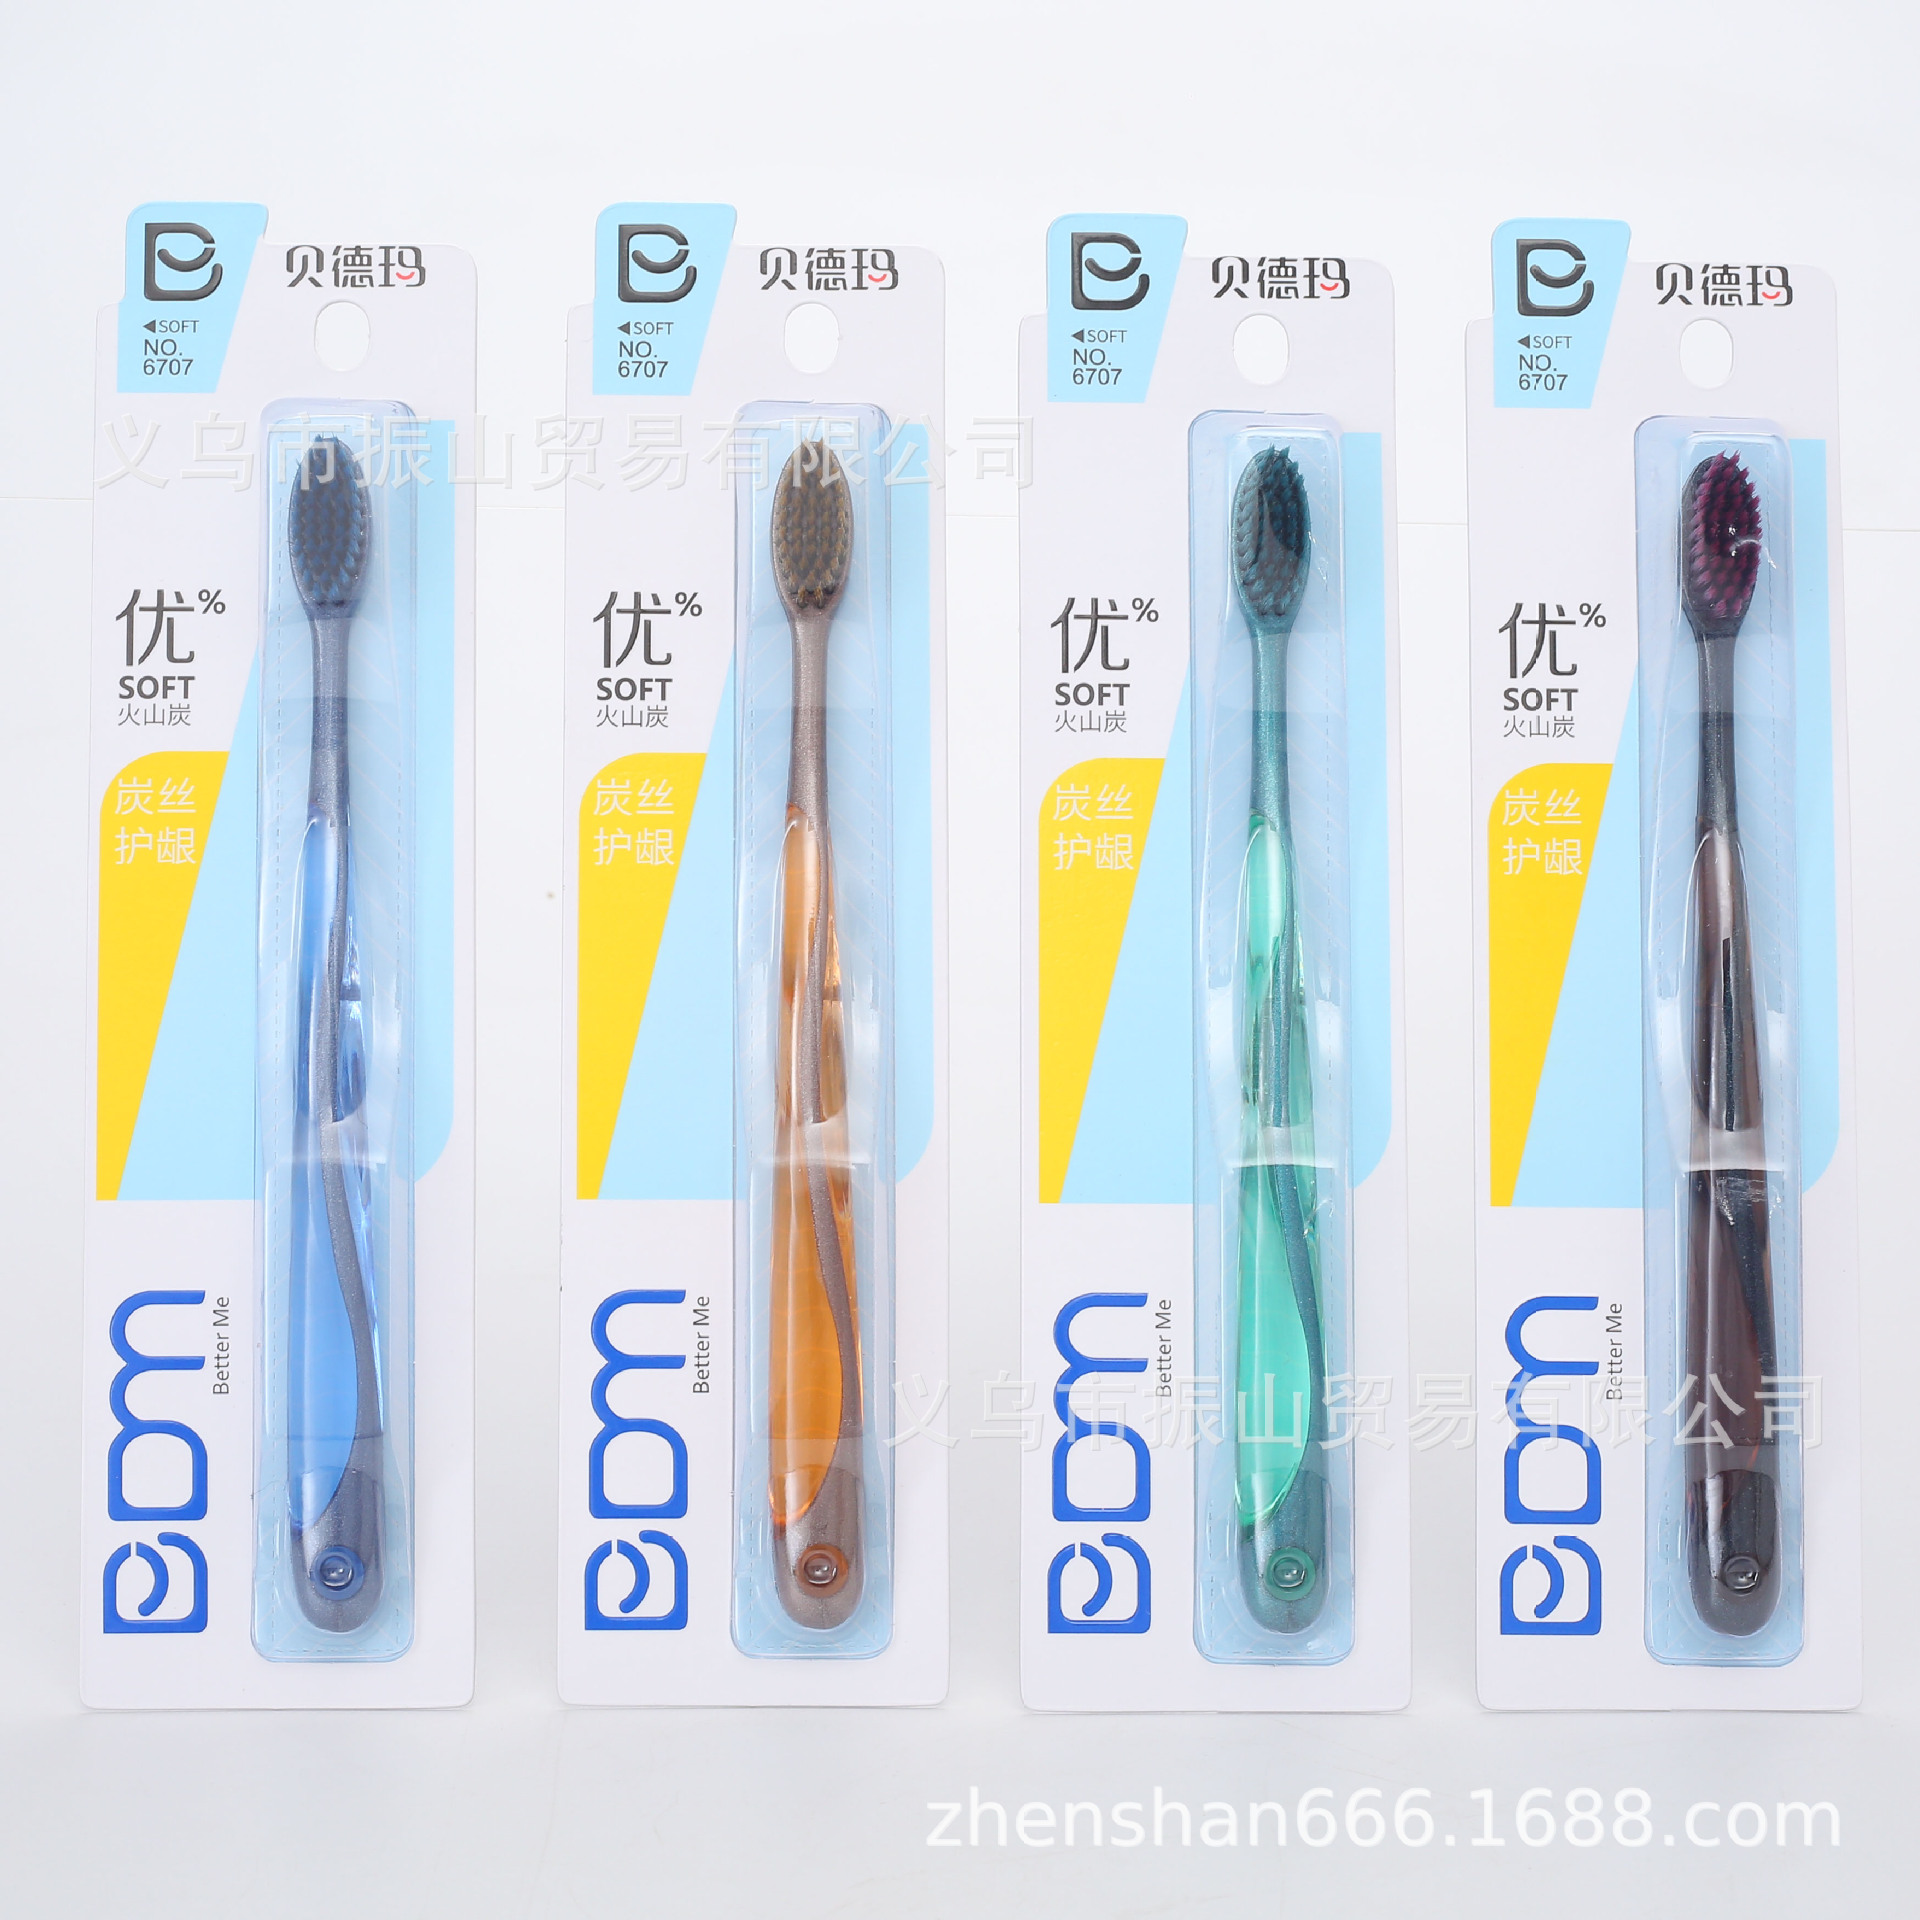 bdm6707 water-sensitive excellent protection% volcanic carbon wire cleaning teeth delicate soft-bristle toothbrush